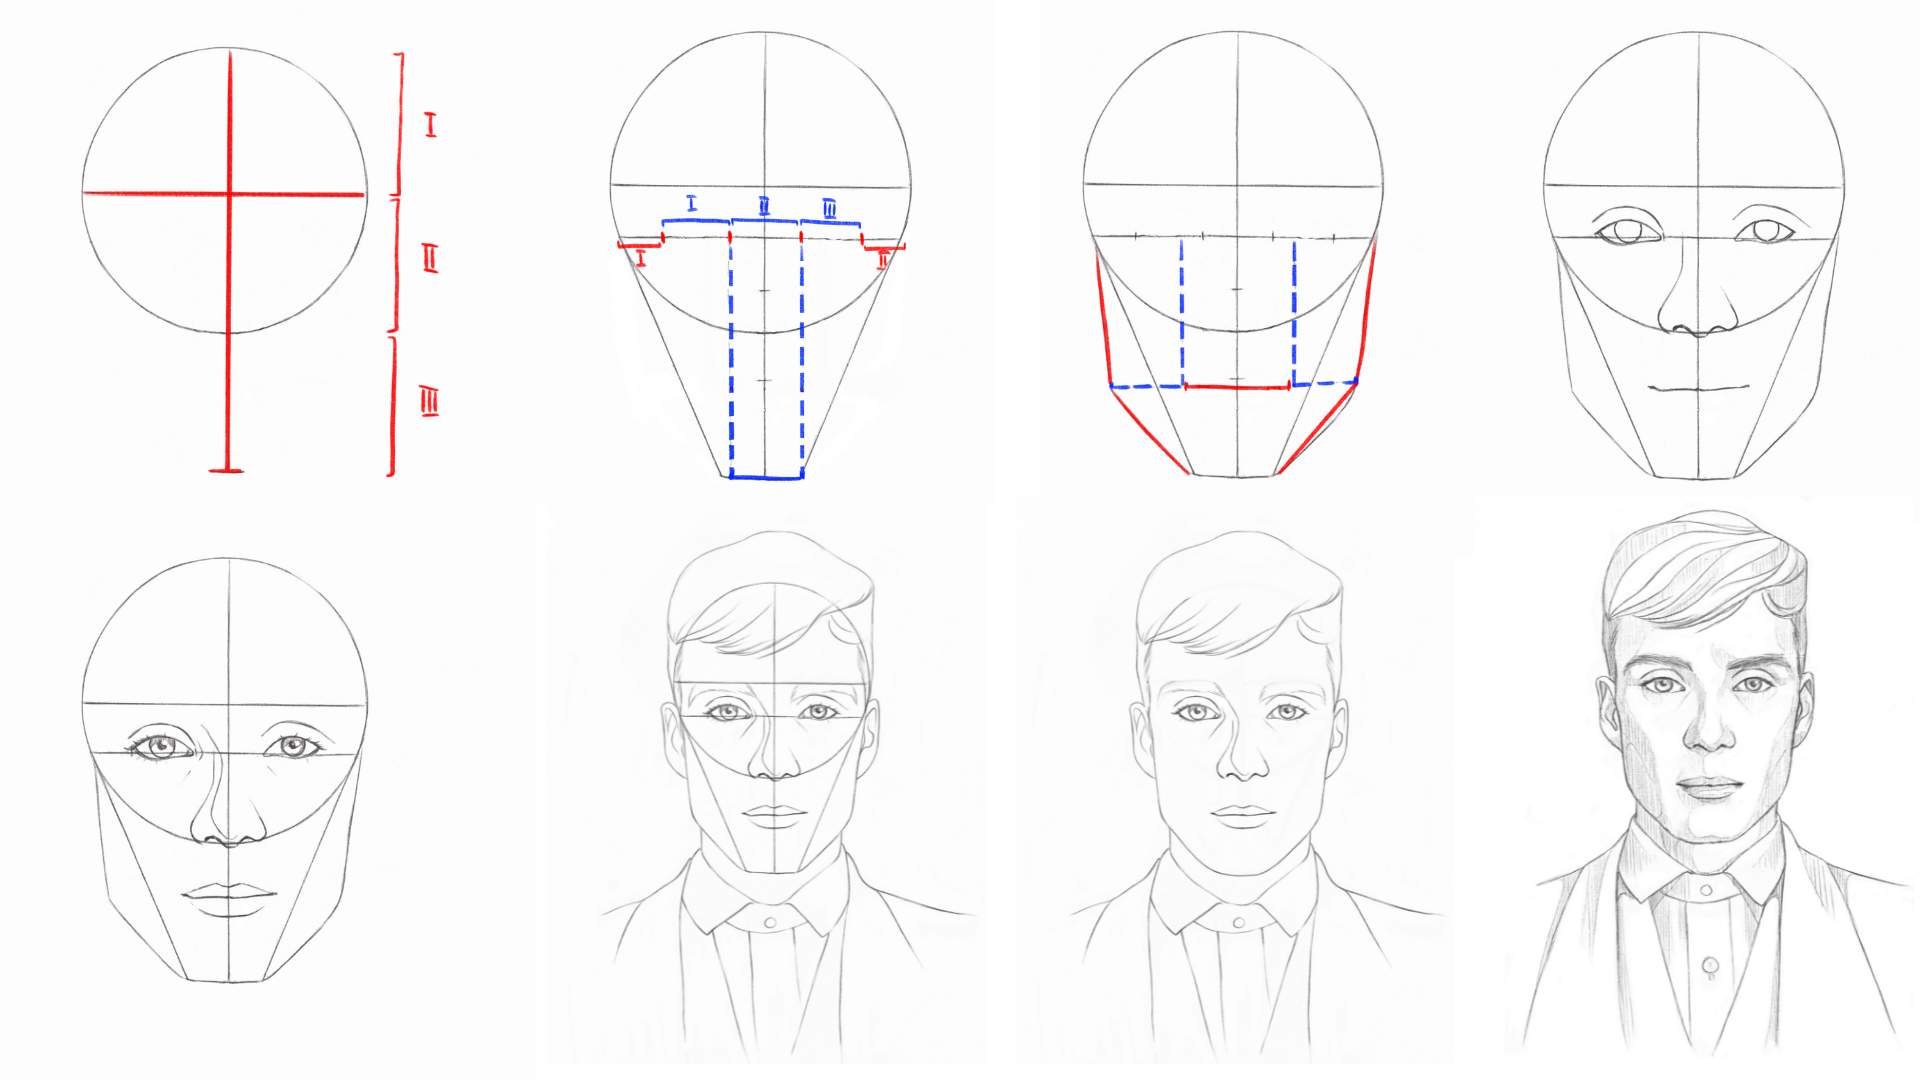 How to Draw a Man's Face From the Front View